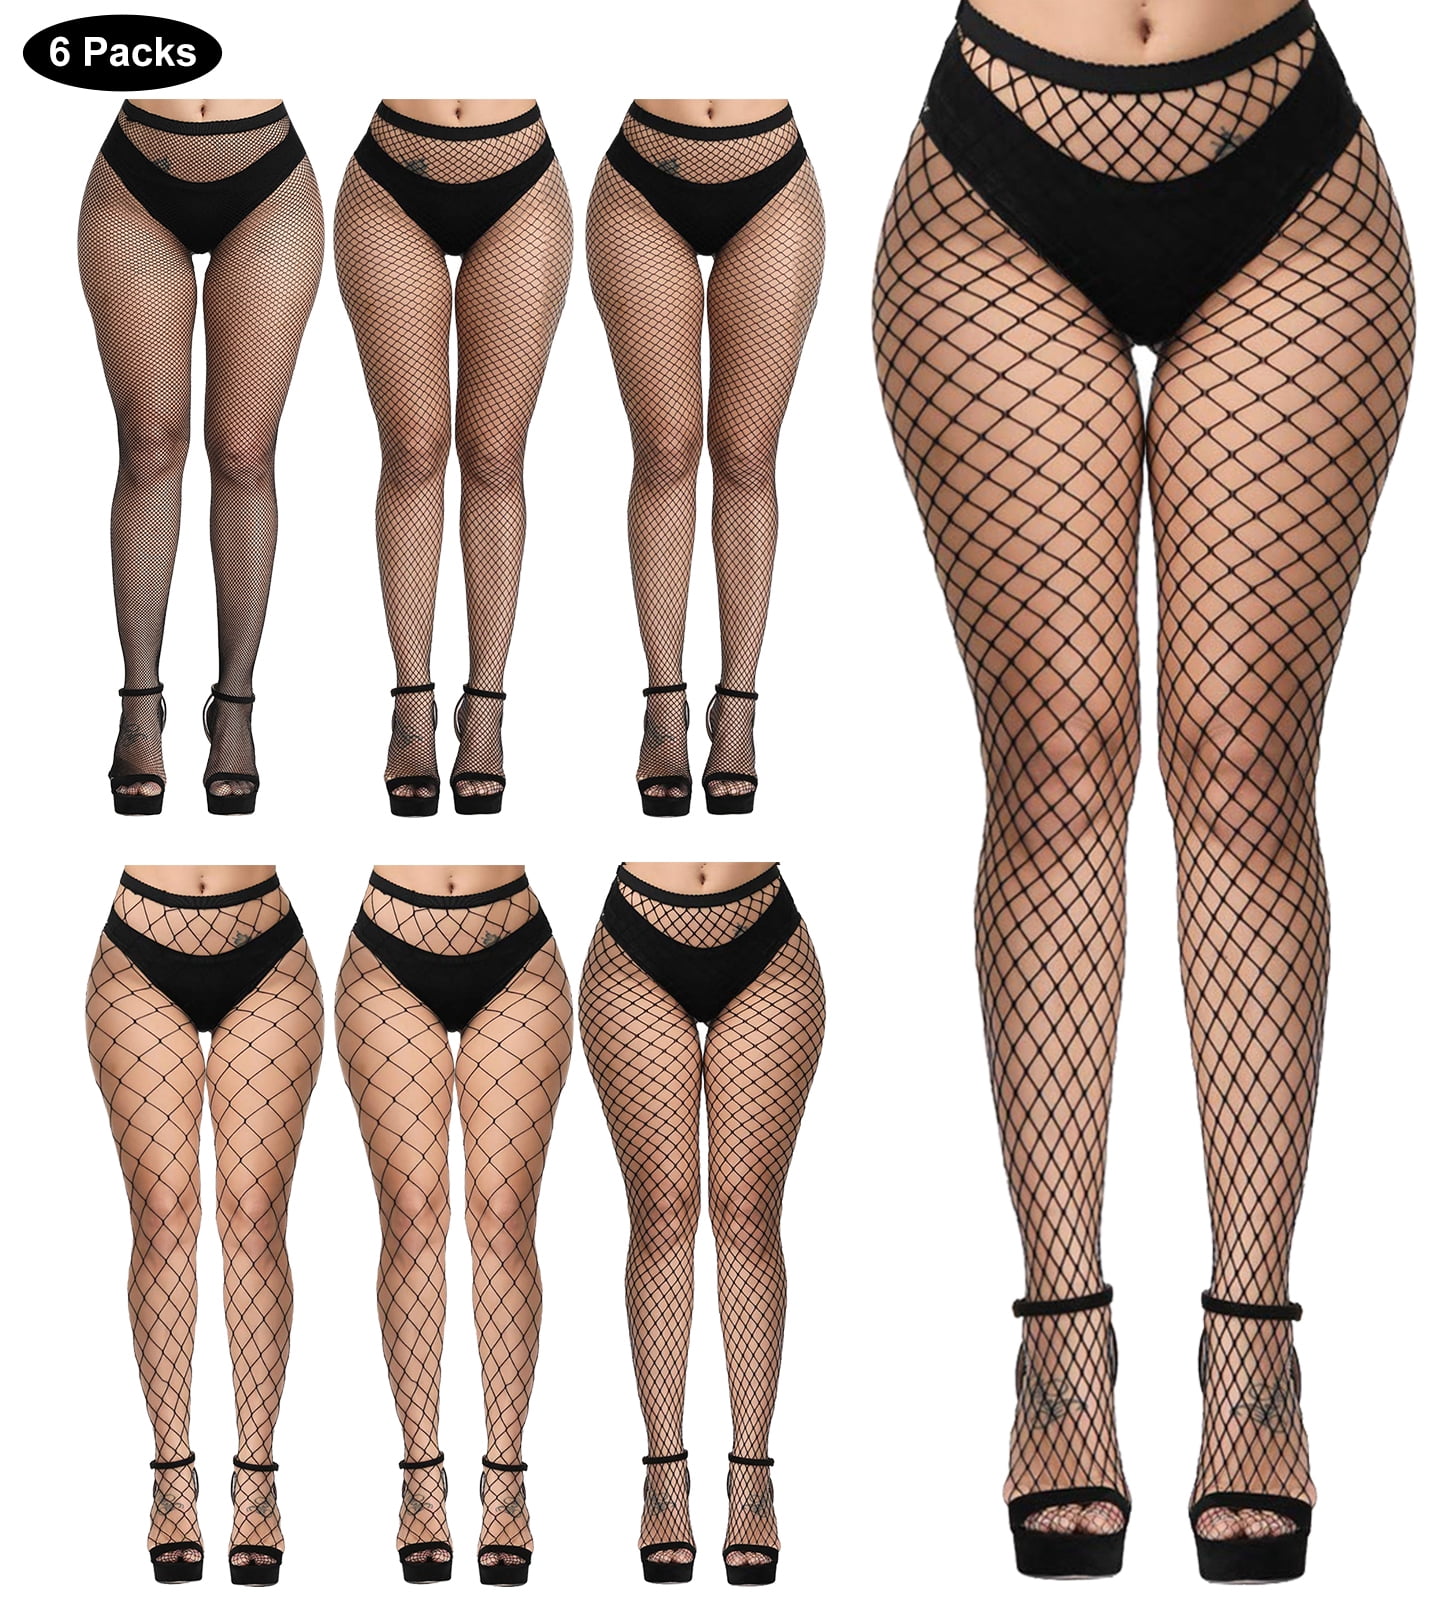 darrel andrews share plus size fishnet thigh high stockings photos